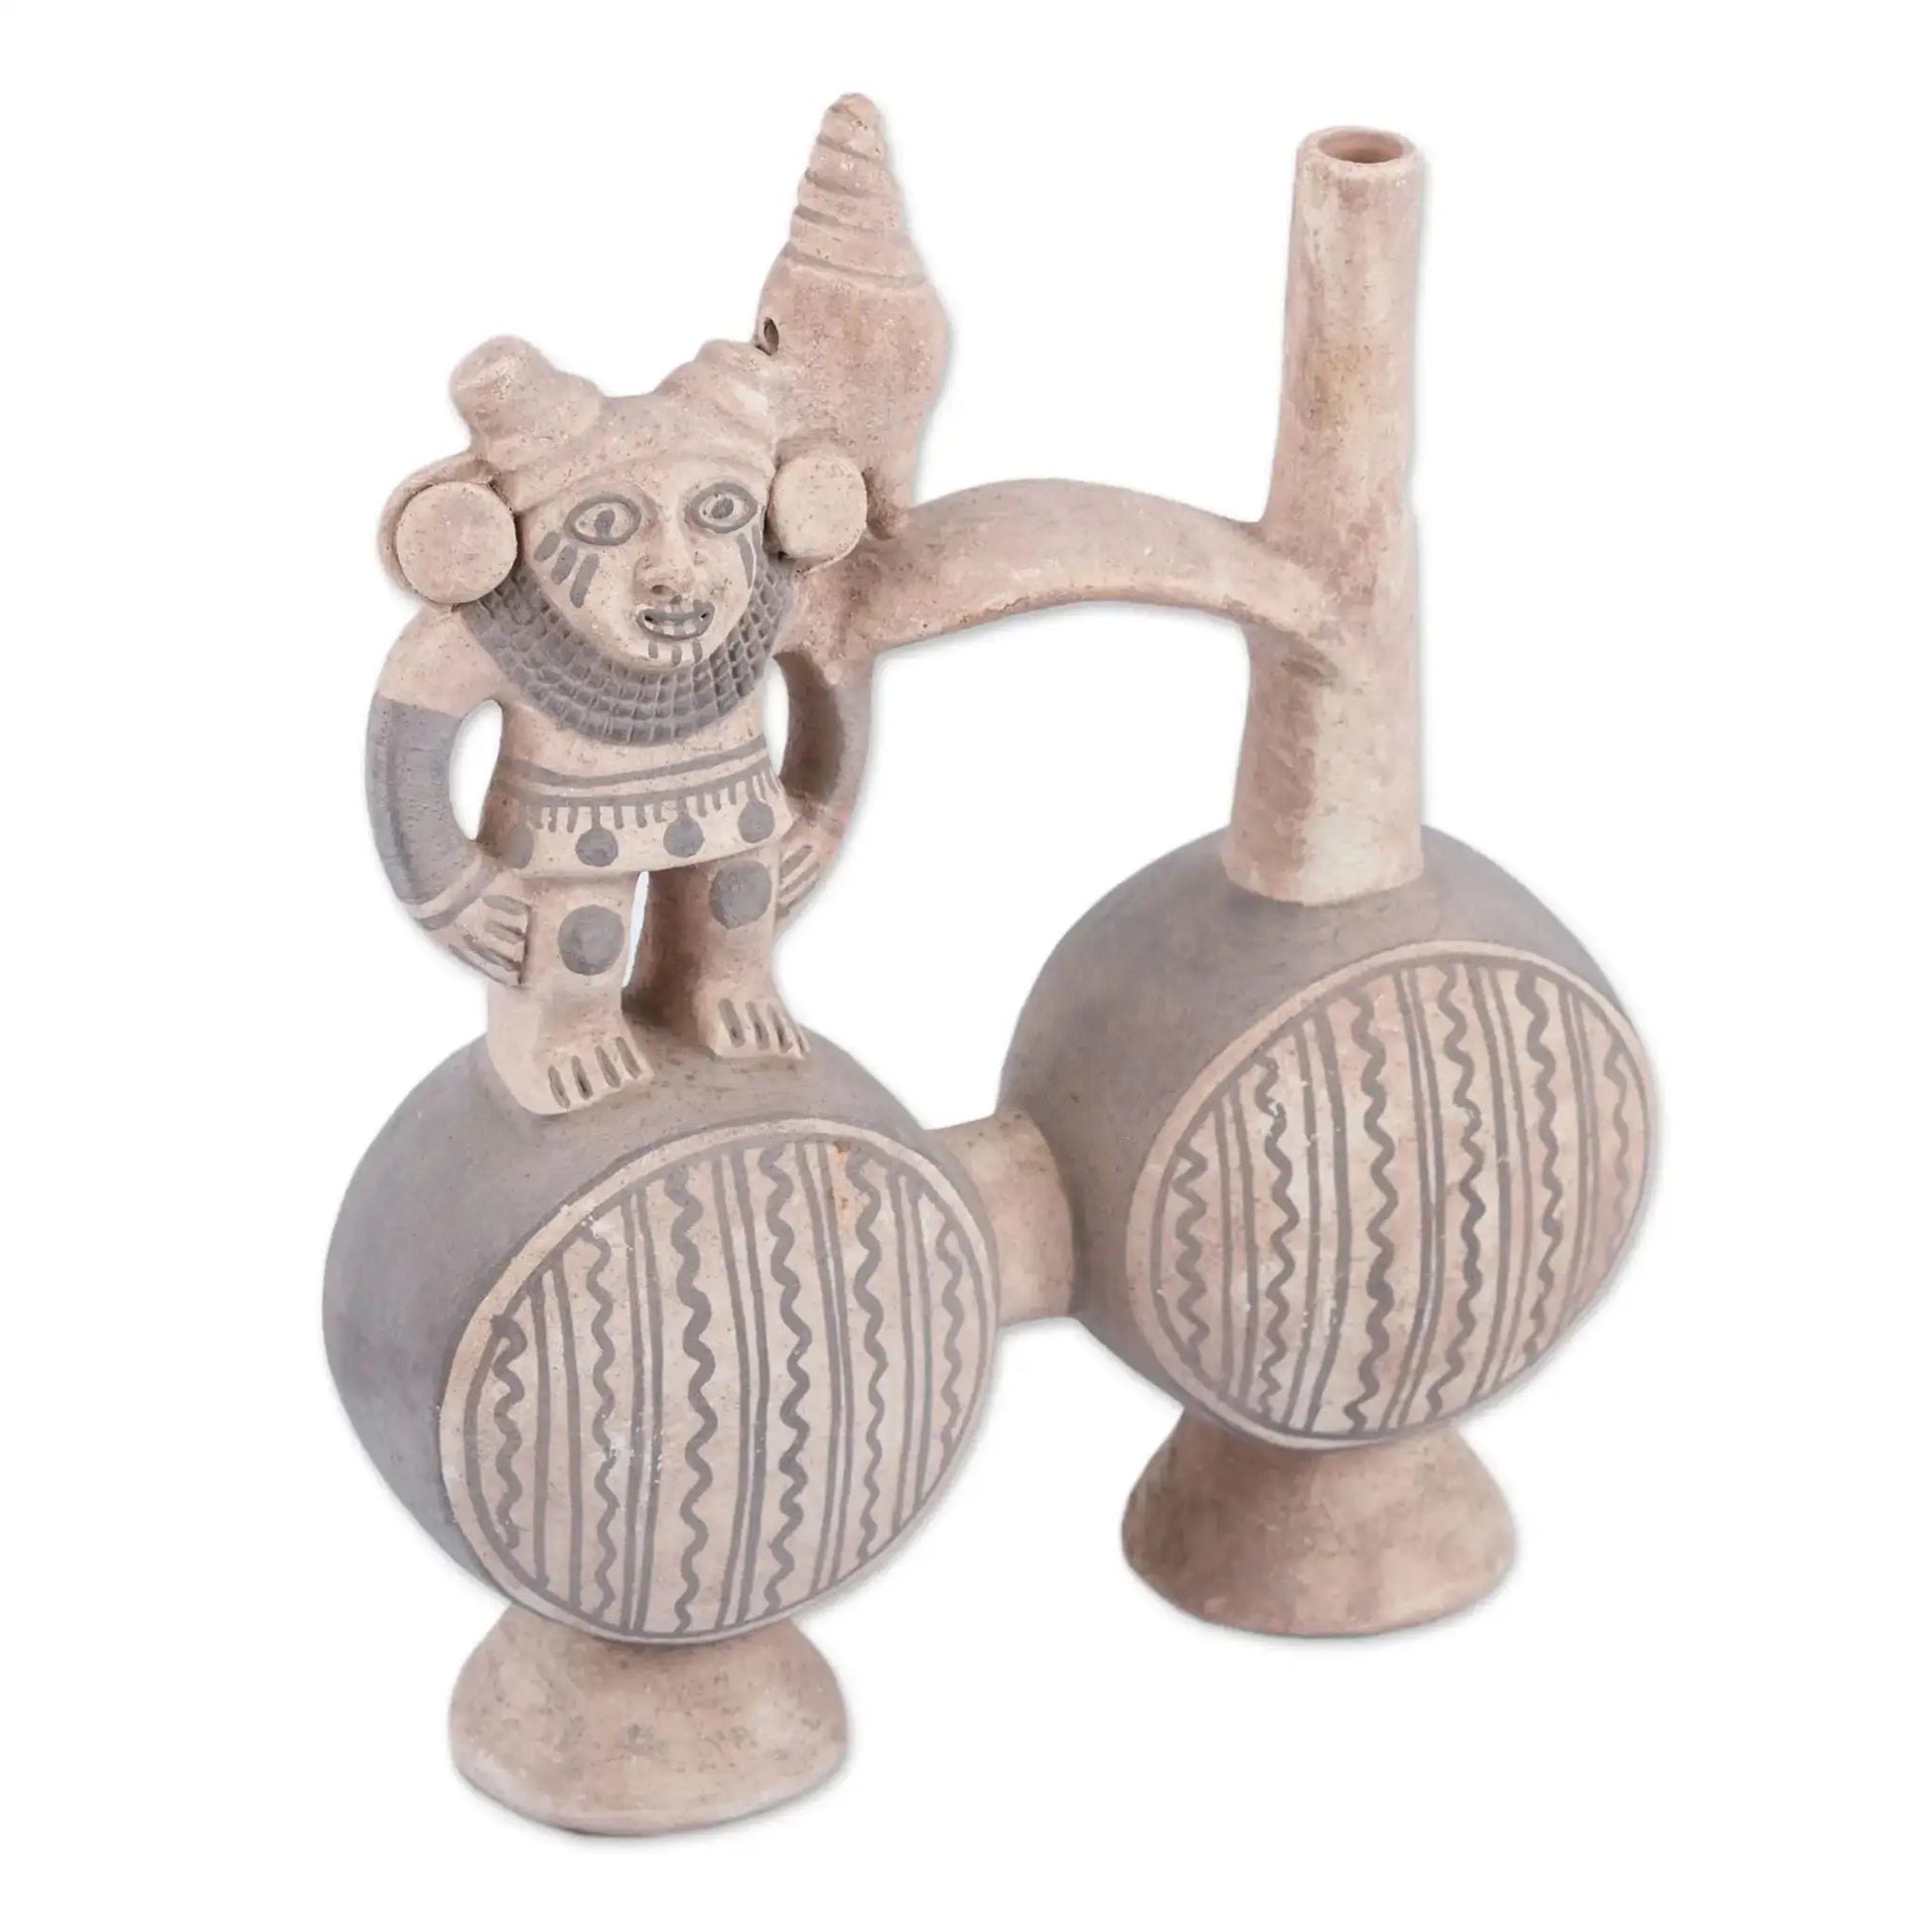 Chancay Effigy - Ancient Peruvian Style Decorative Vessel in